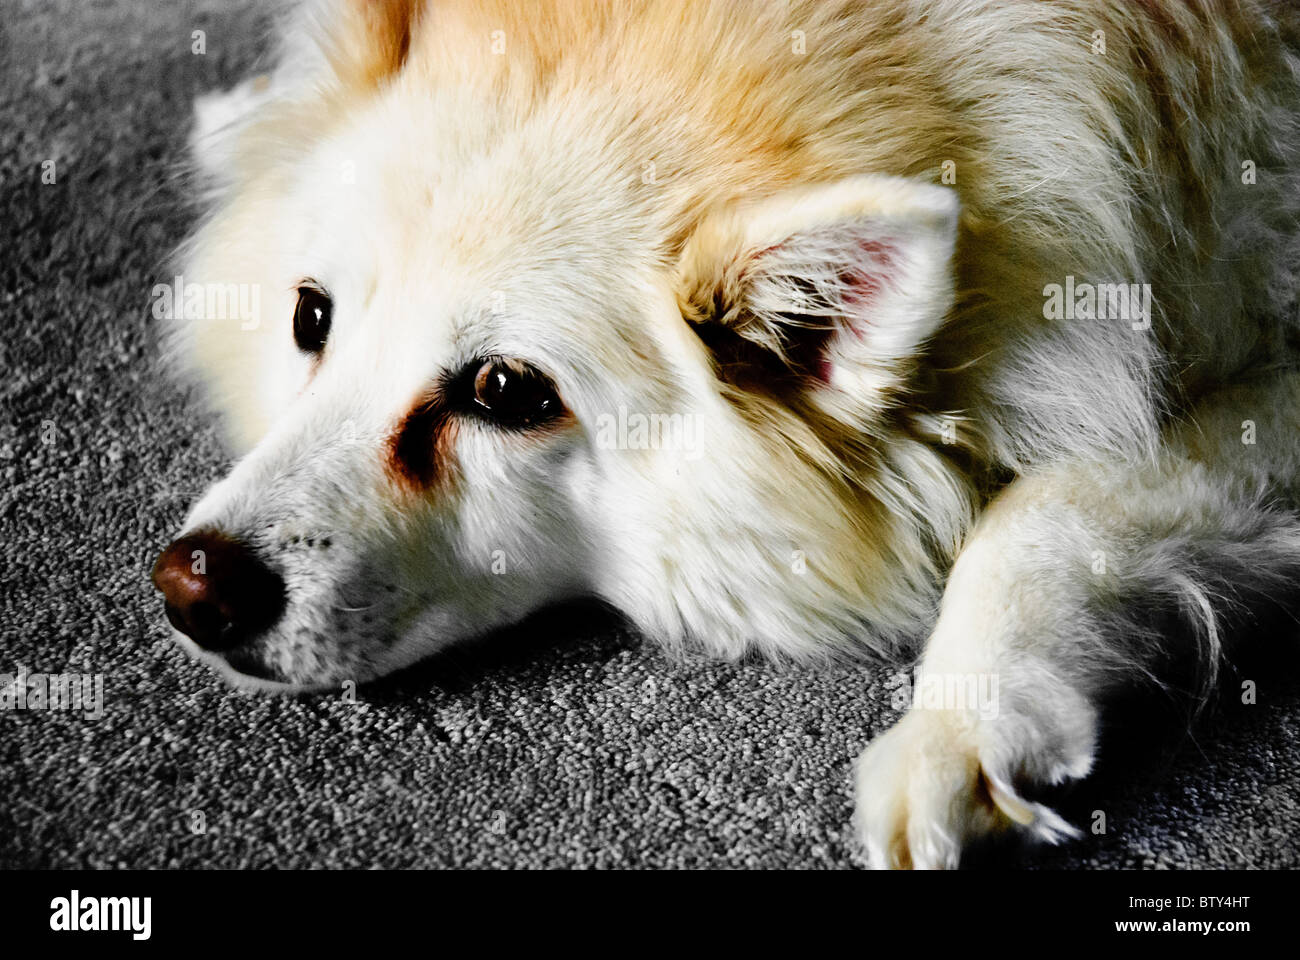 American Eskimo Dog lying down Banque D'Images